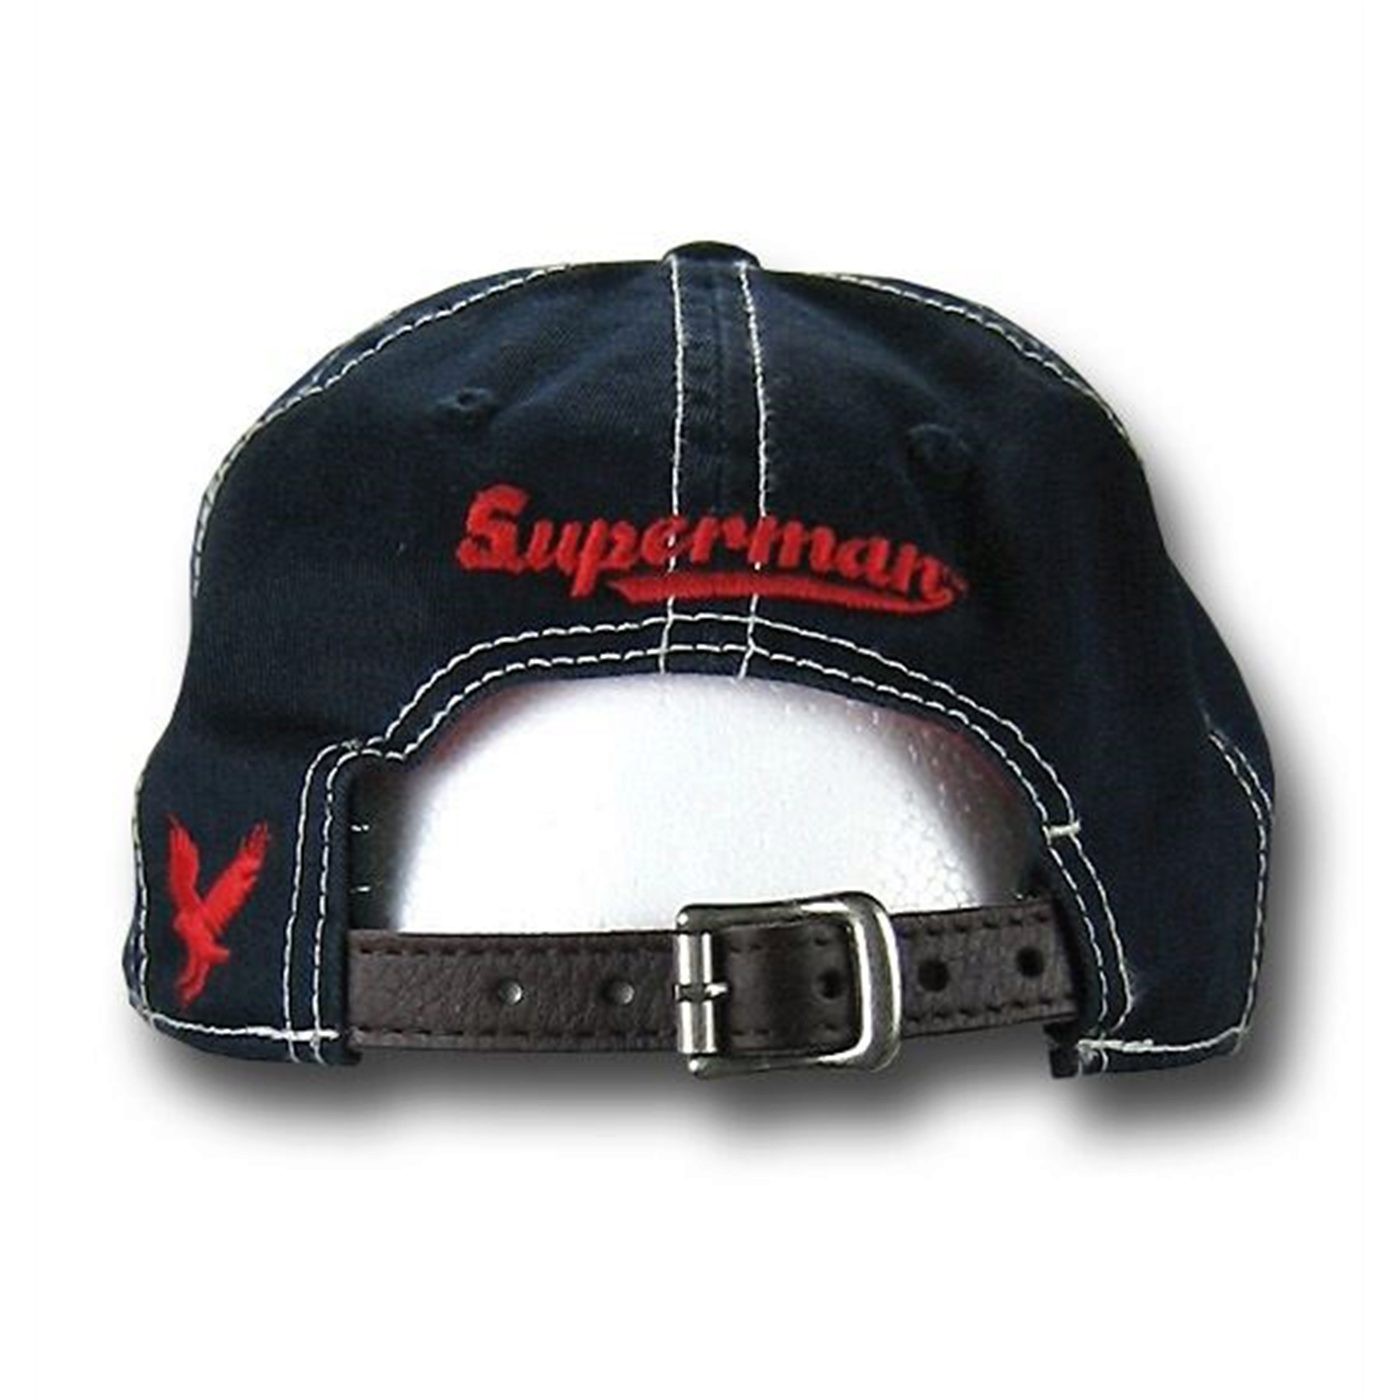 Superman Navy with Leather Strap Baseball Cap